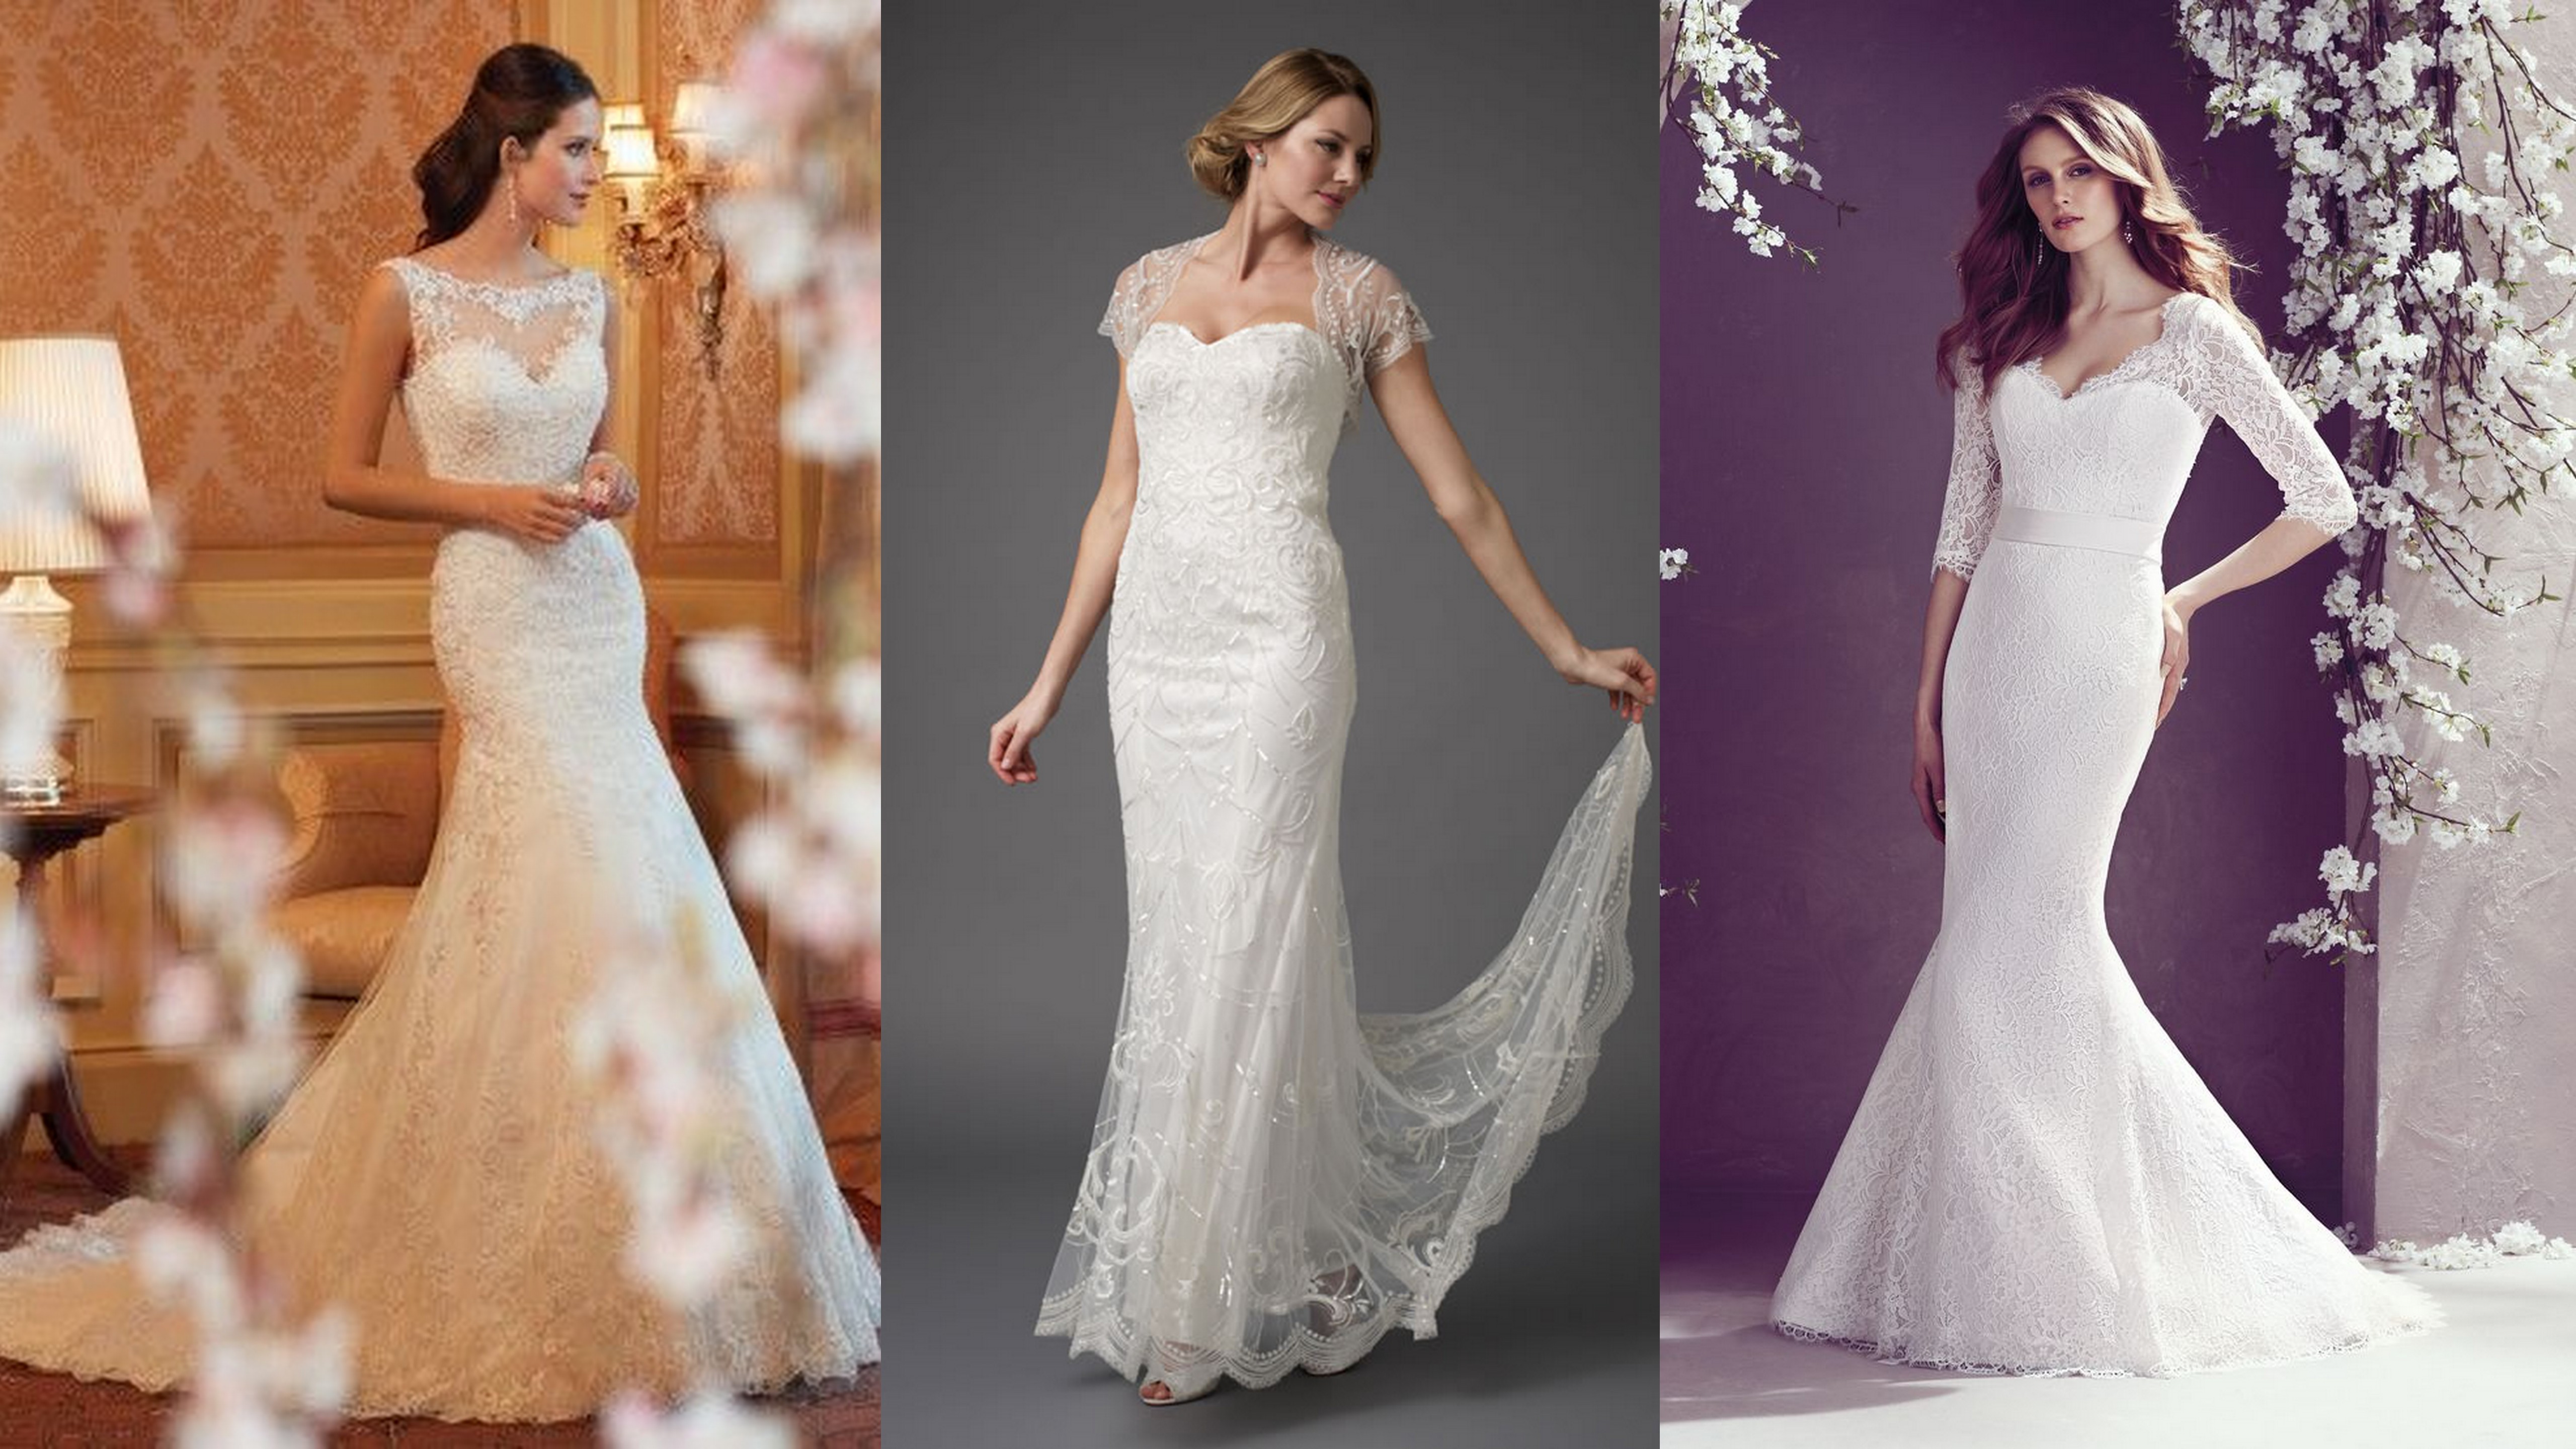 Top 5 Tips to Find Ideal Wedding Dress for Your Body Type - 123WeddingCards